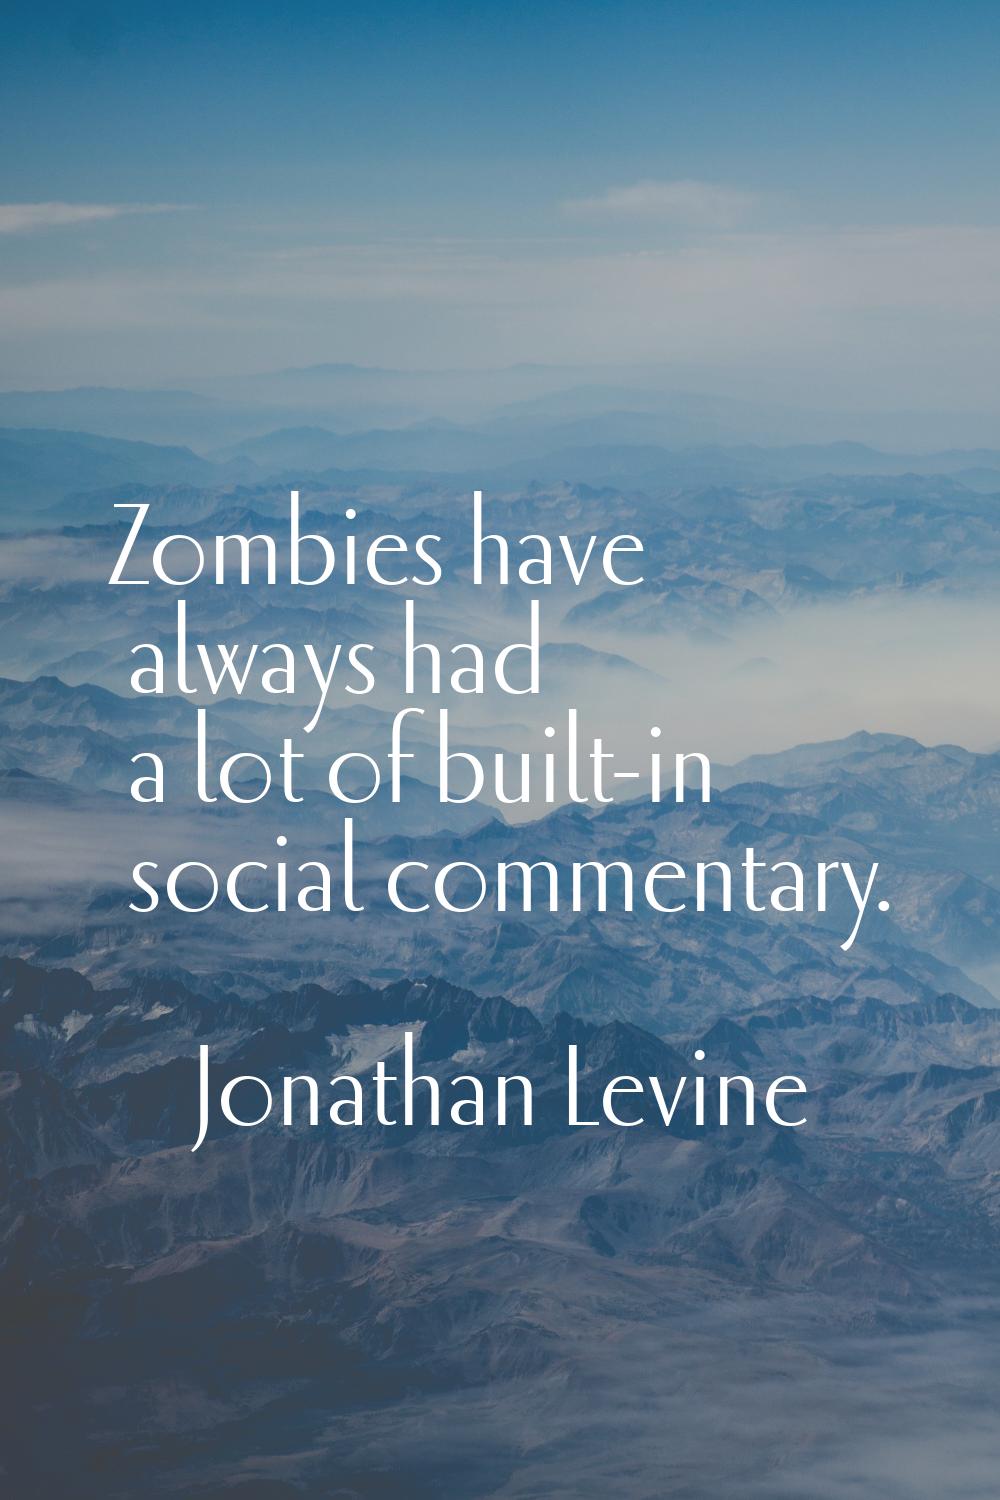 Zombies have always had a lot of built-in social commentary.